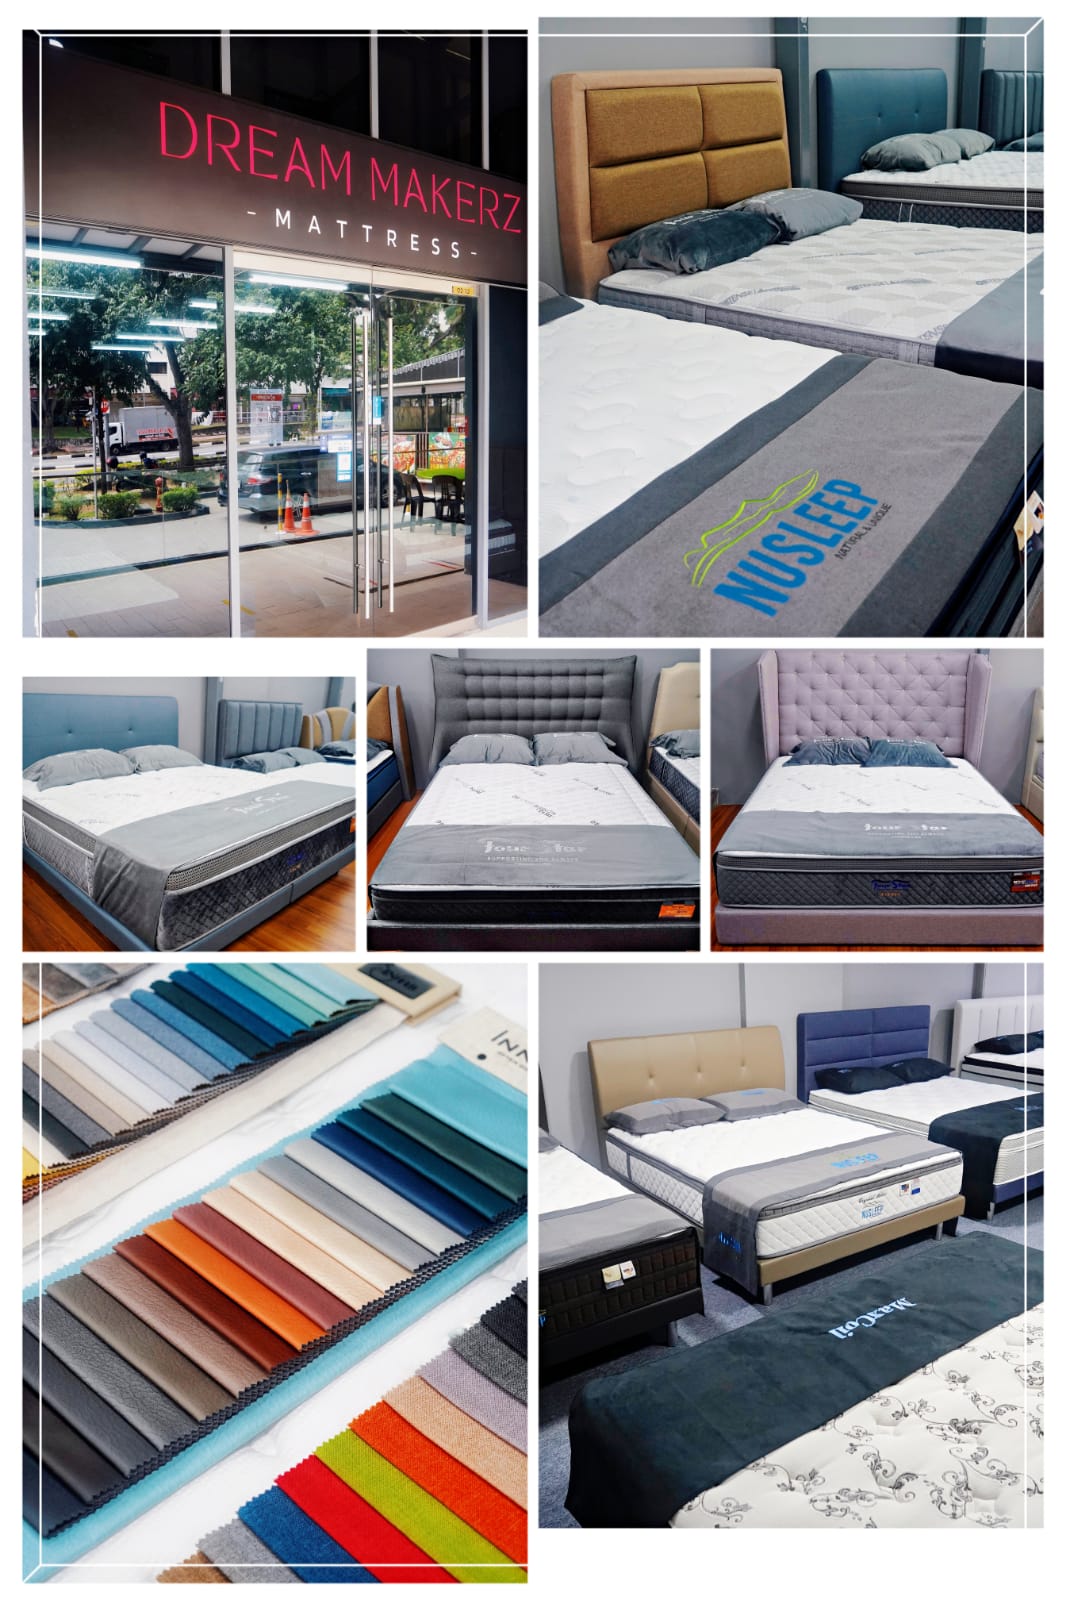 Lobang: Up to 70% off mattresses at Mattress Store in Chai Chee from 9 - 19 June 2022; Queen-sized mattress from S$399 - 3